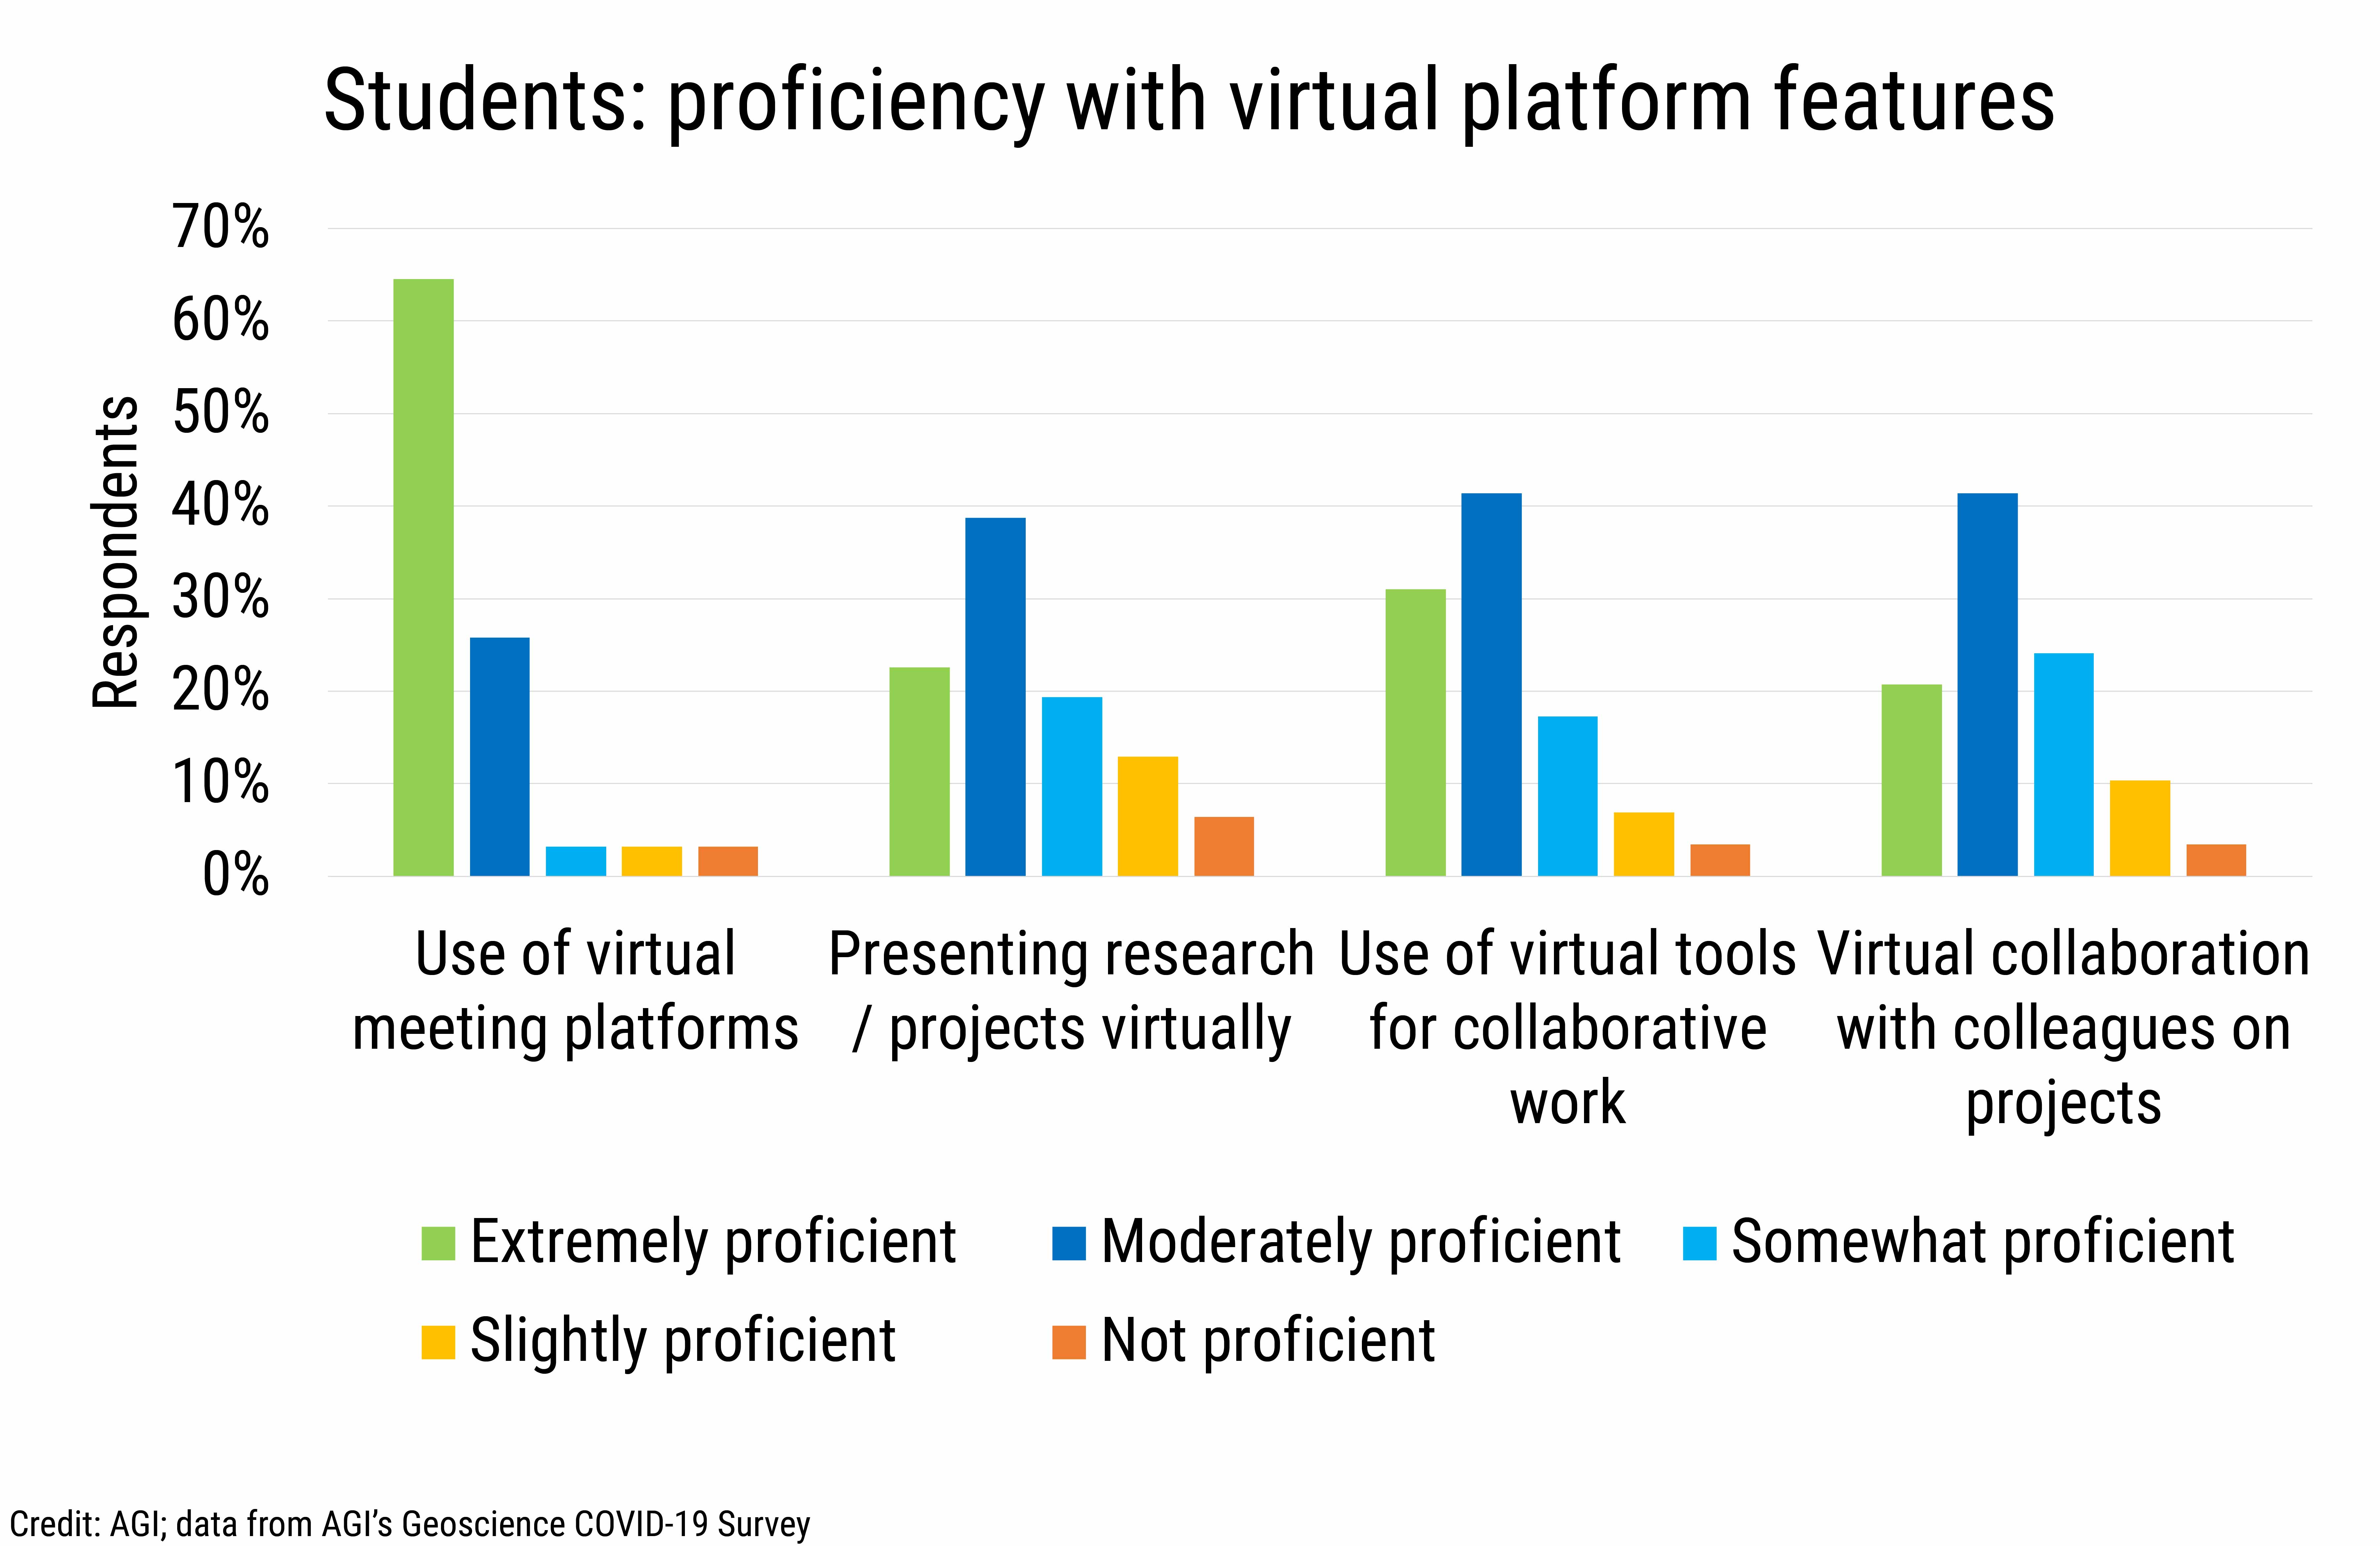 DB_2020-031 chart16 Students proficiency with virtual platform features (Credit: AGI; data from AGI's Geoscience COVID-19 Survey)